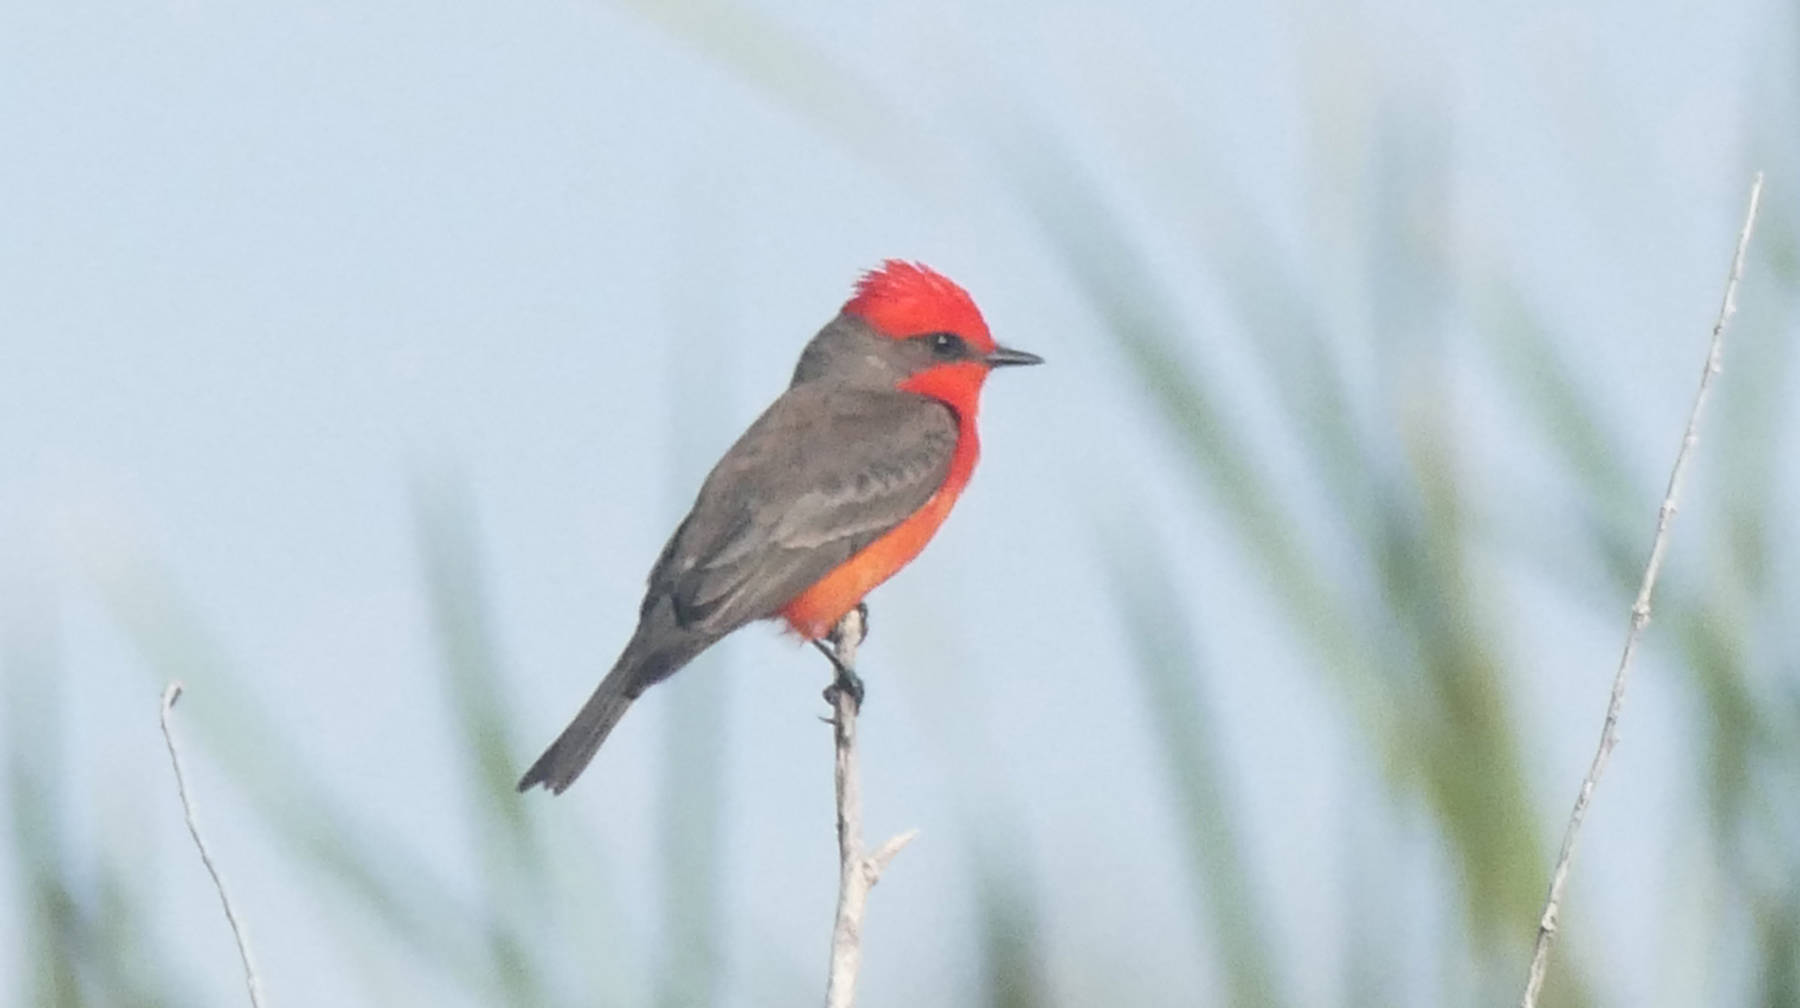 The vermilion flycatcher is common in the Loreto area; the showy red males are conspicuous in the shrubs. (Courtesy Photo | Bob Armstrong)